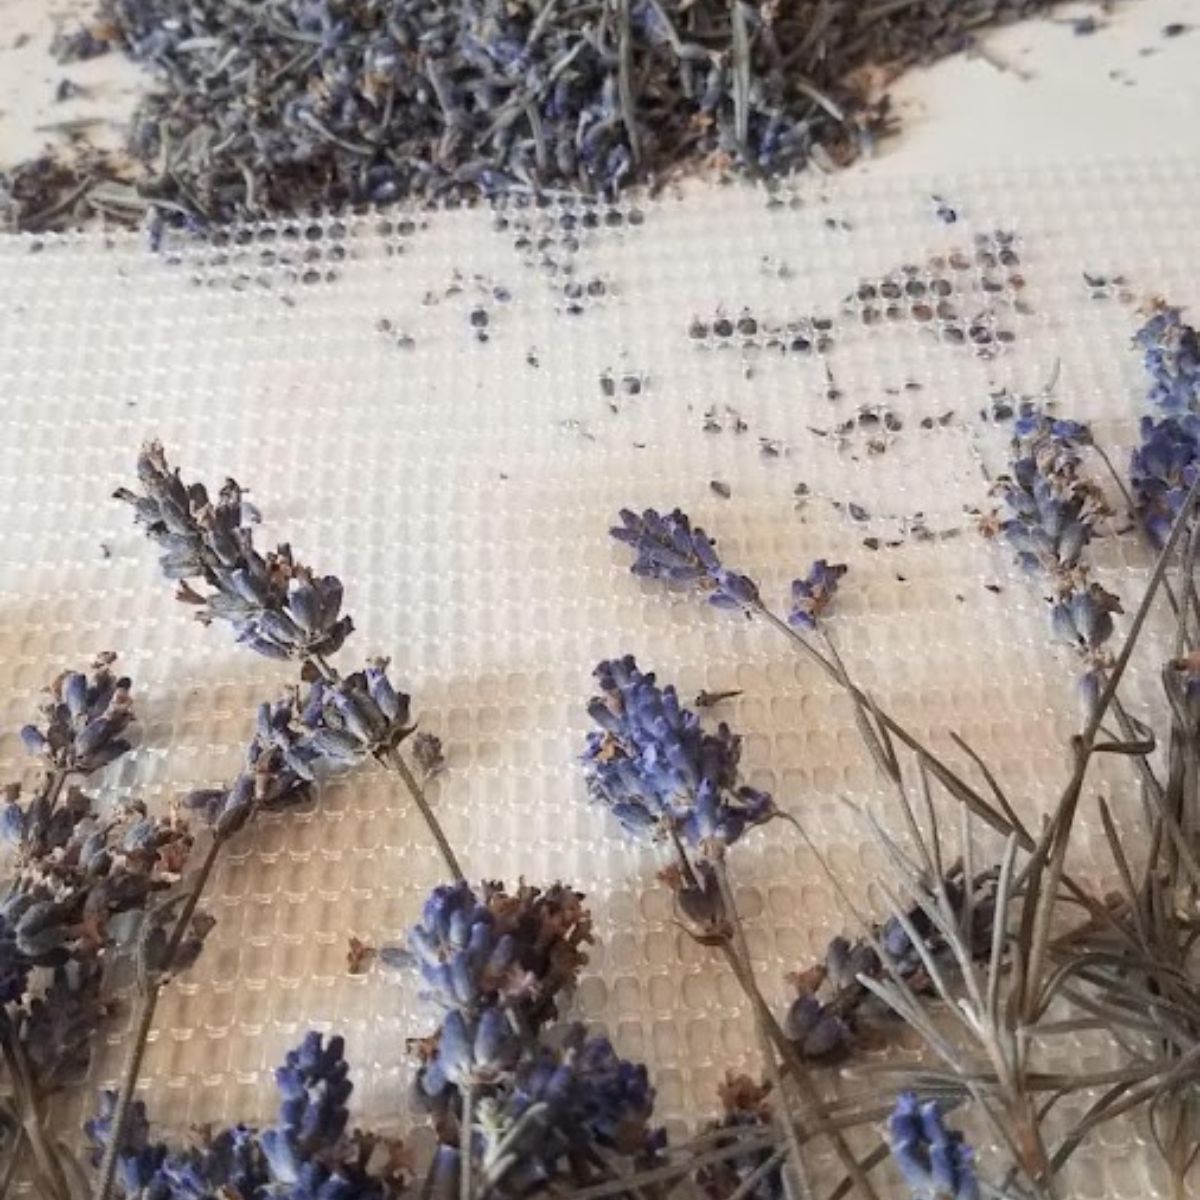 lavender that was dried in the dehydrator.